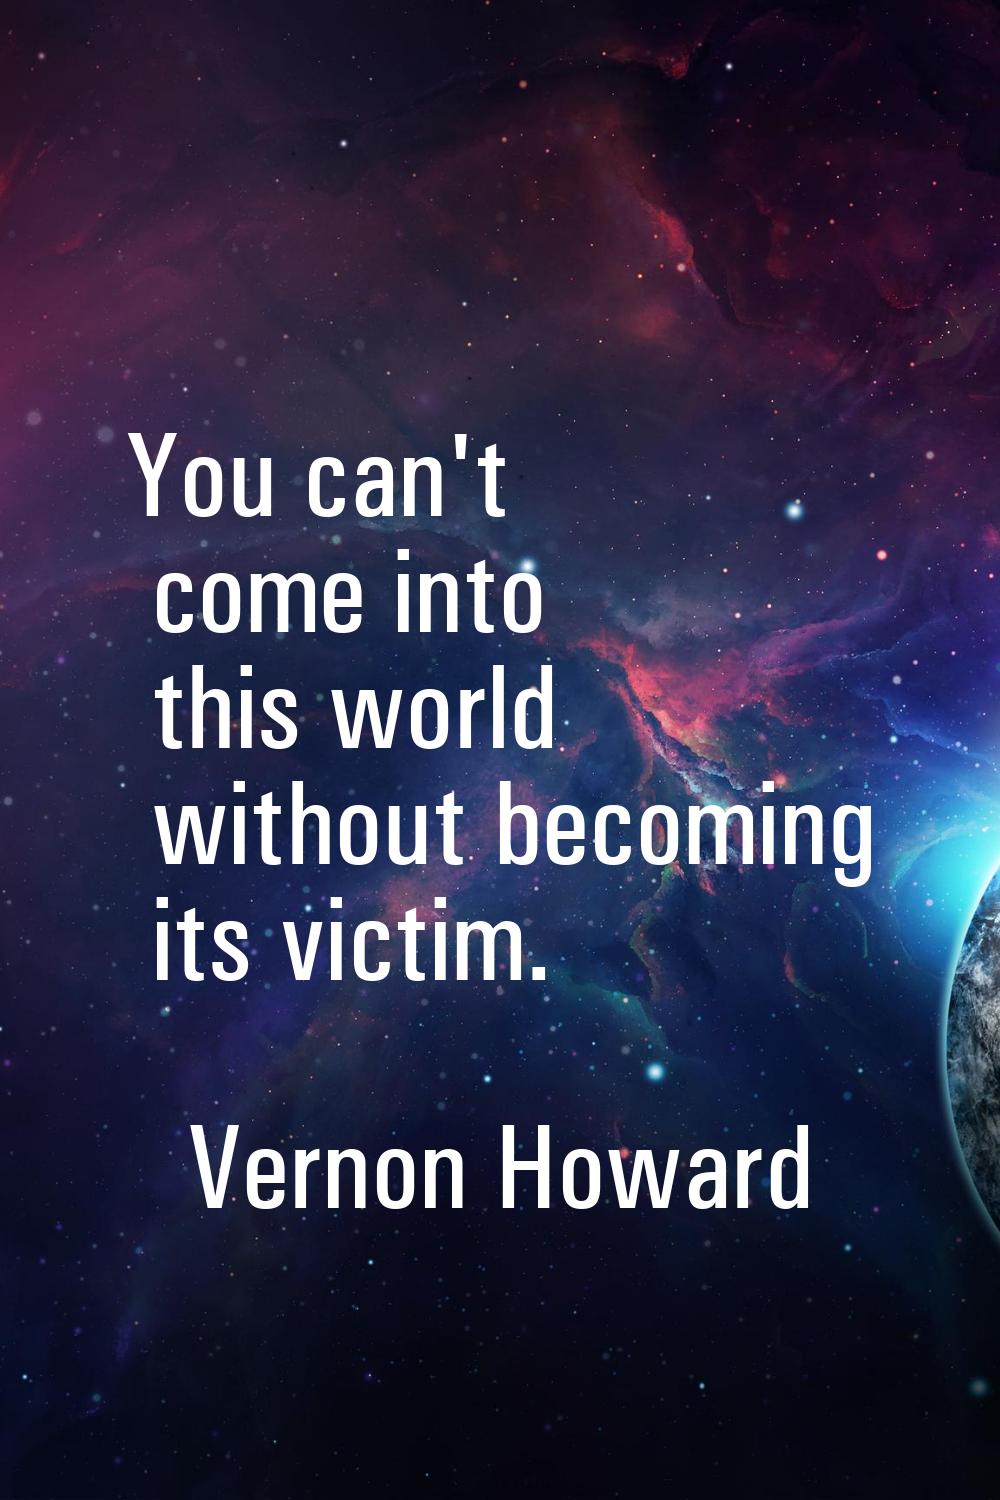 You can't come into this world without becoming its victim.